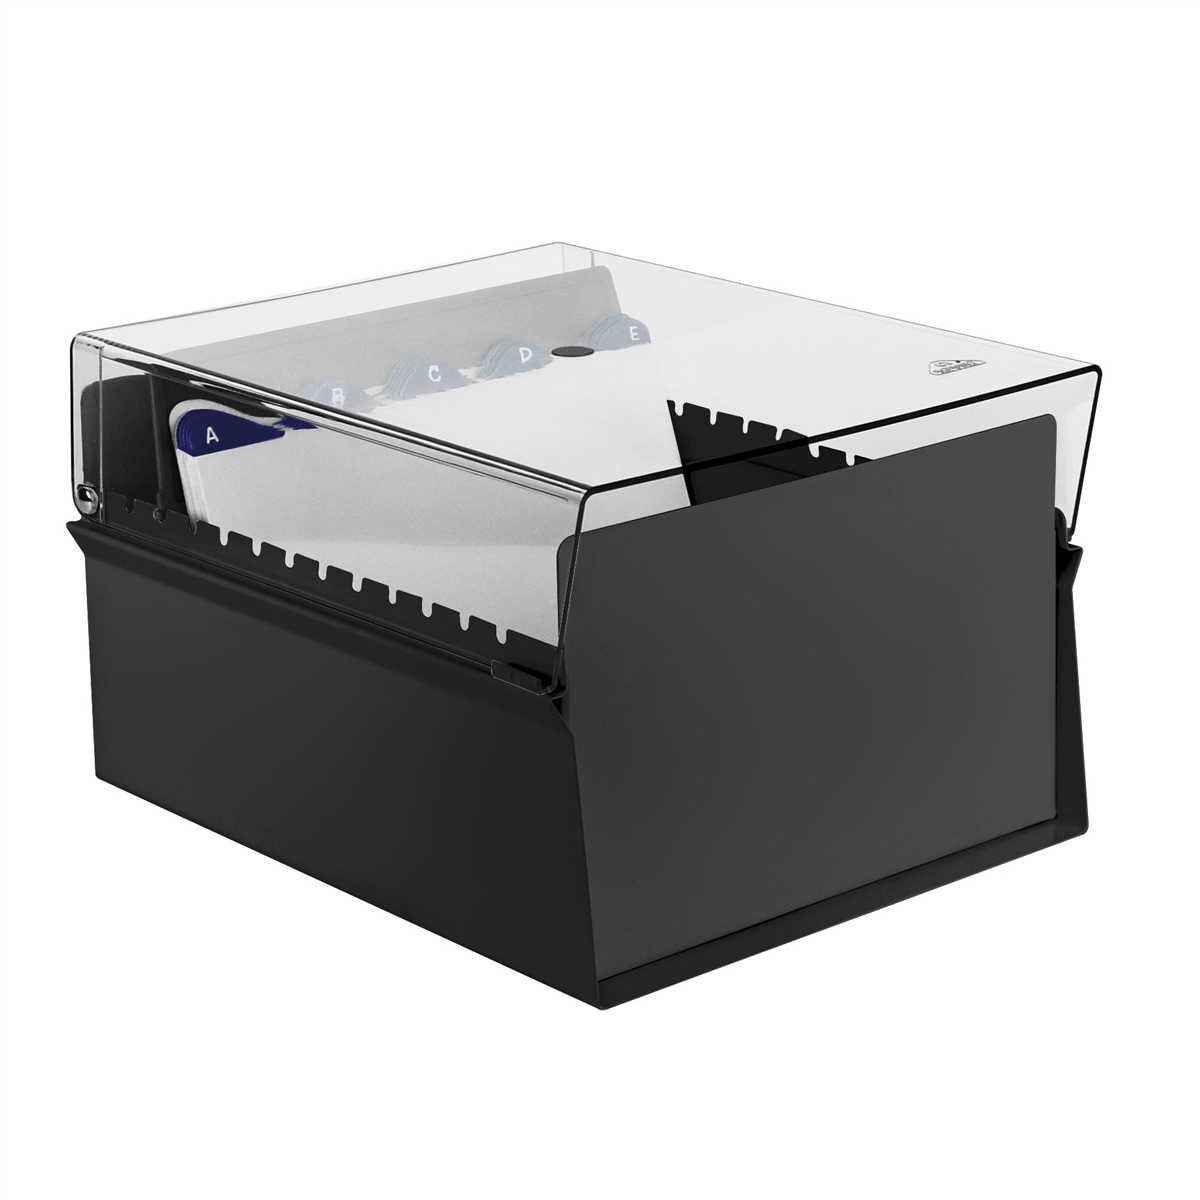 Acrimet 6 x 9 Card File Holder Organizer Metal (AZ Index Cards and Divider  Included) (Black Color with Crystal Plastic Lid Cover)